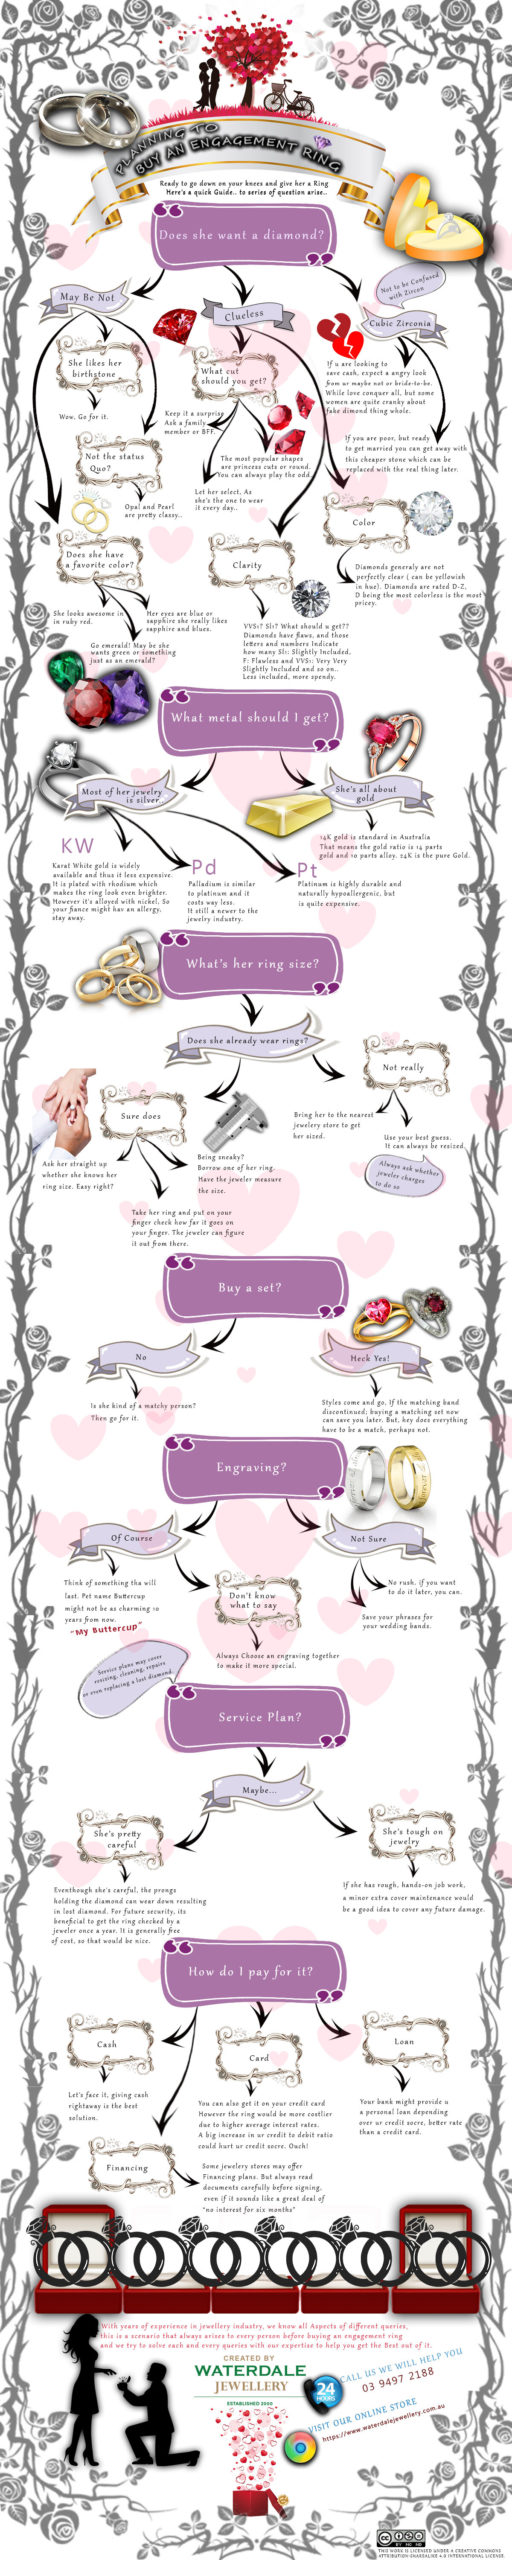 Buying an Engagement Ring Infographic.jpg